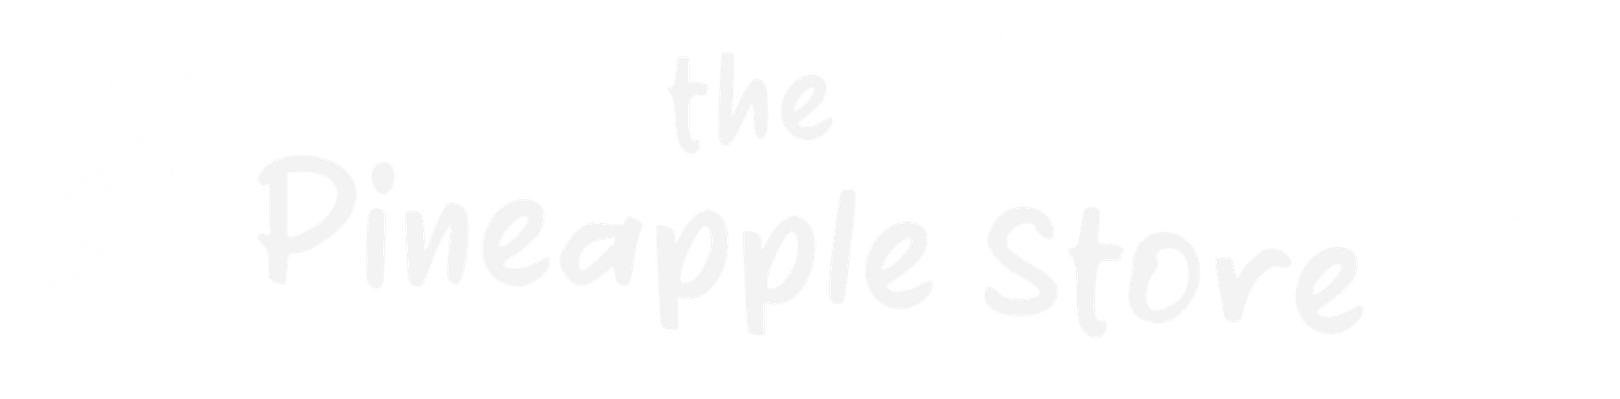 A white logo for the pineapple store on a white background.